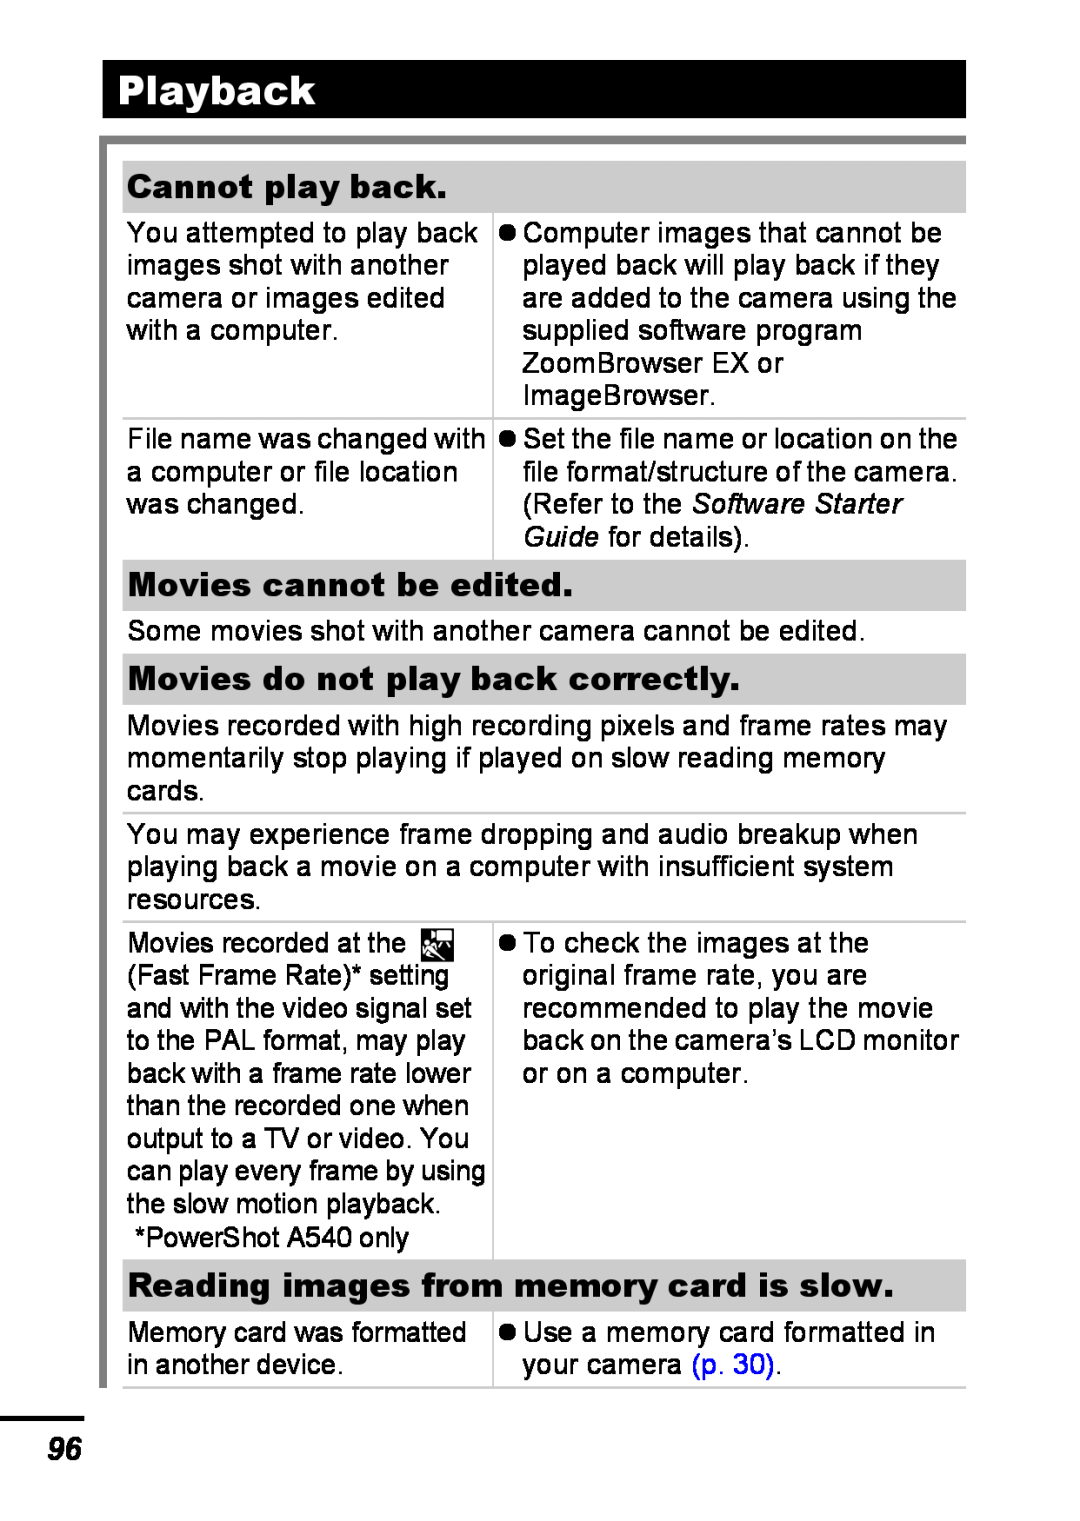 Canon A540 appendix Playback, Cannot play back, Movies cannot be edited, Movies do not play back correctly 